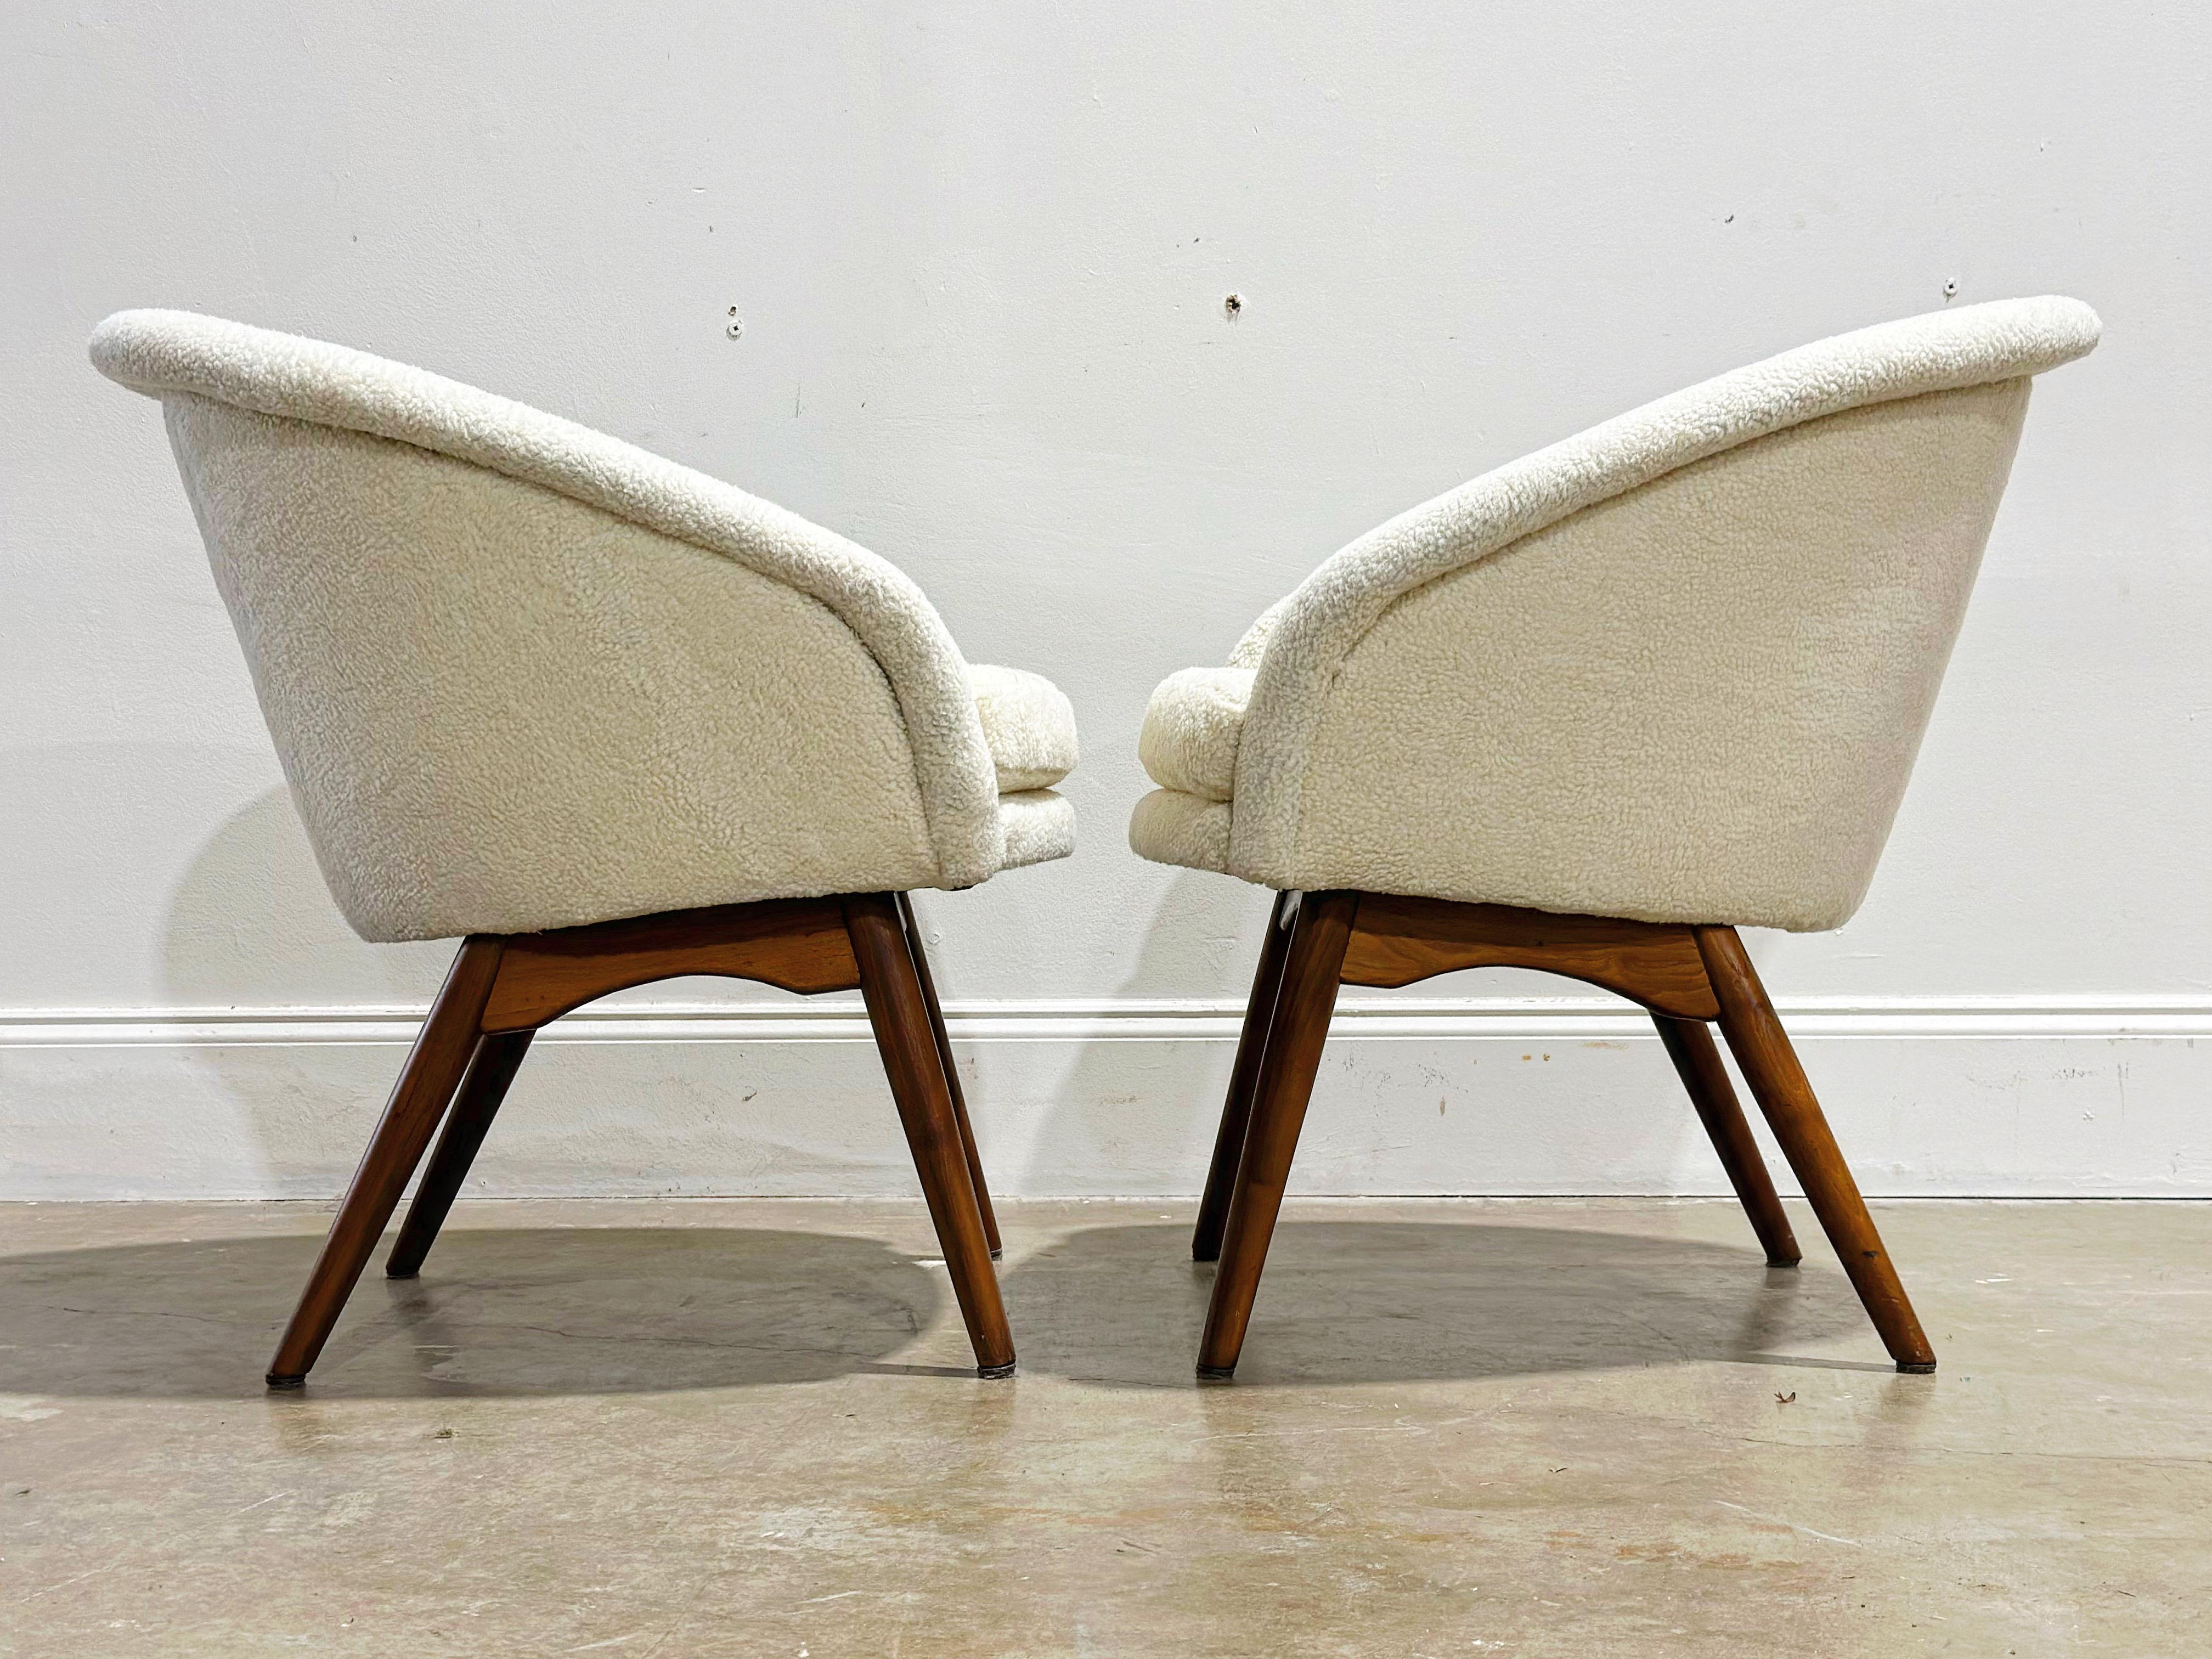 Pair of uncommon petite occasional barrel back chairs by Milo Baughman for Thayer Coggin, circa early 1960's. Gorgeous silouhette - sherpa boucle upholstered sculpted rounded back shells sit atop solid American black walnut bases with exposed